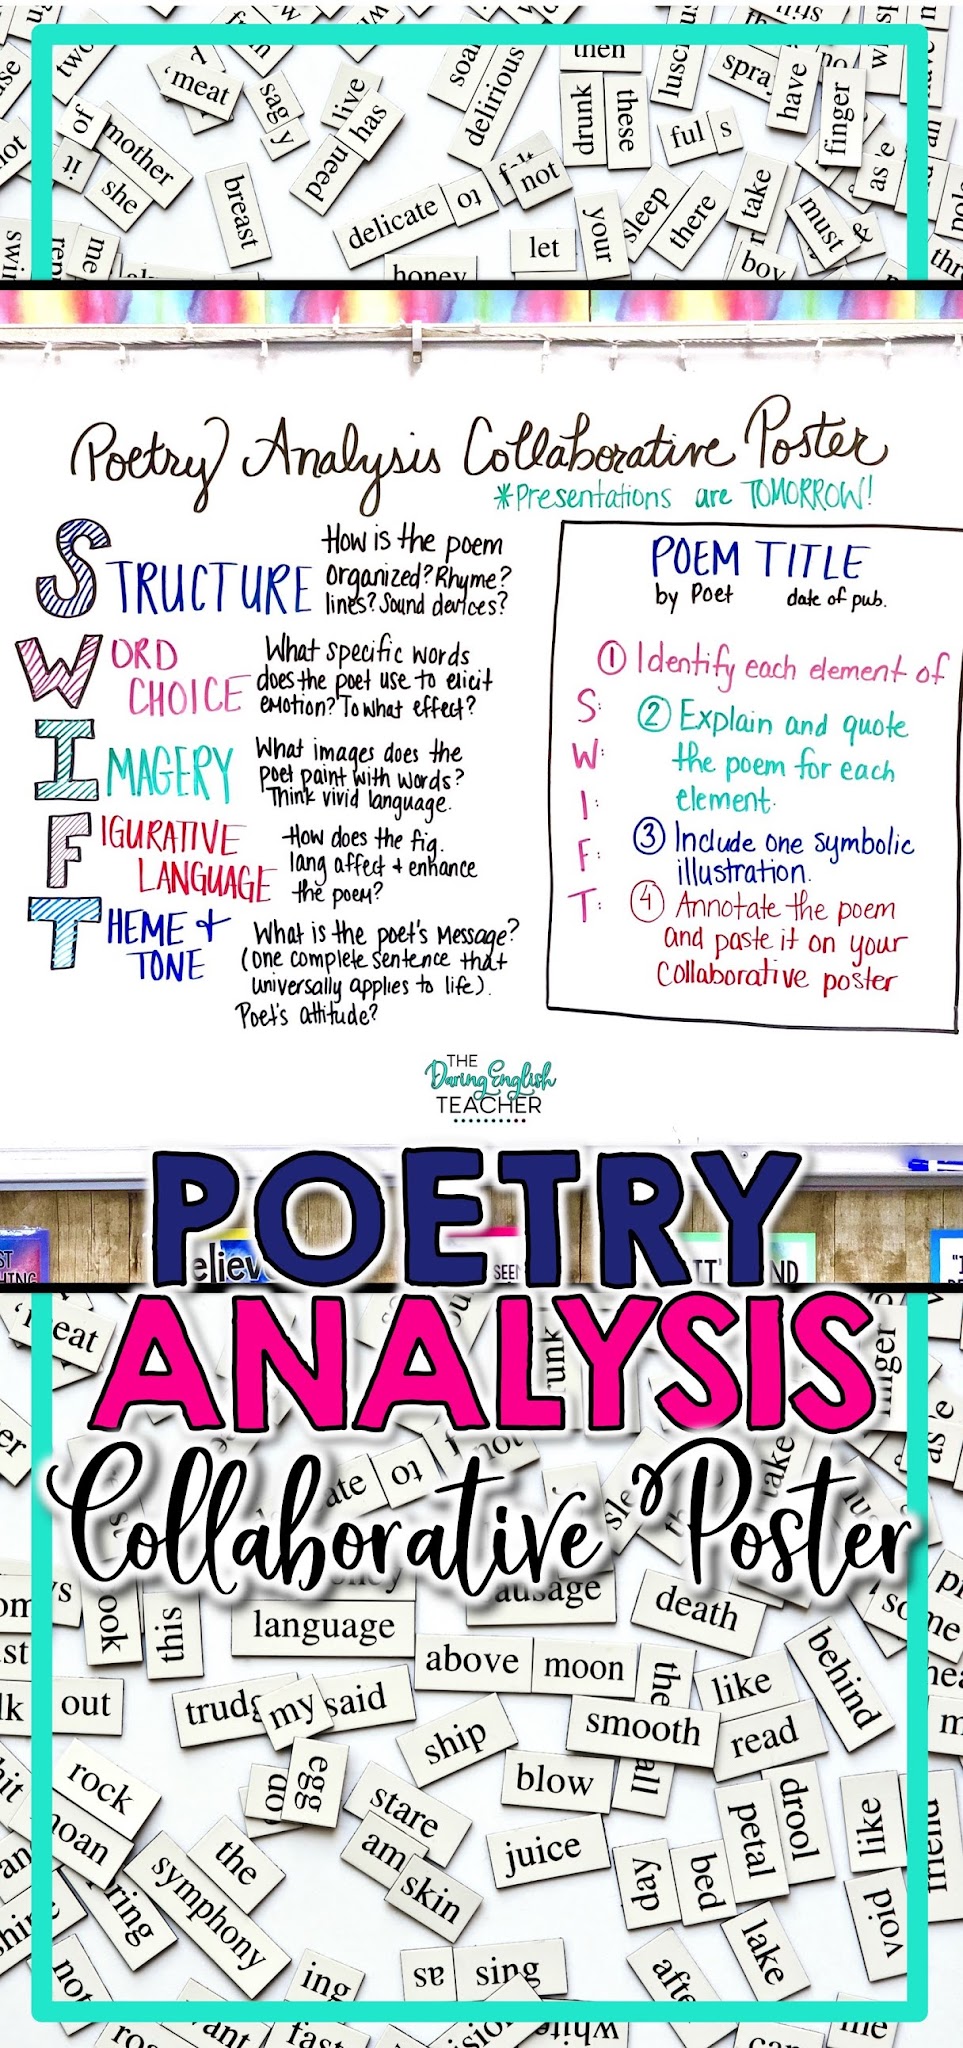 Poetry Analysis Collaborative Poster Project for Secondary ELA